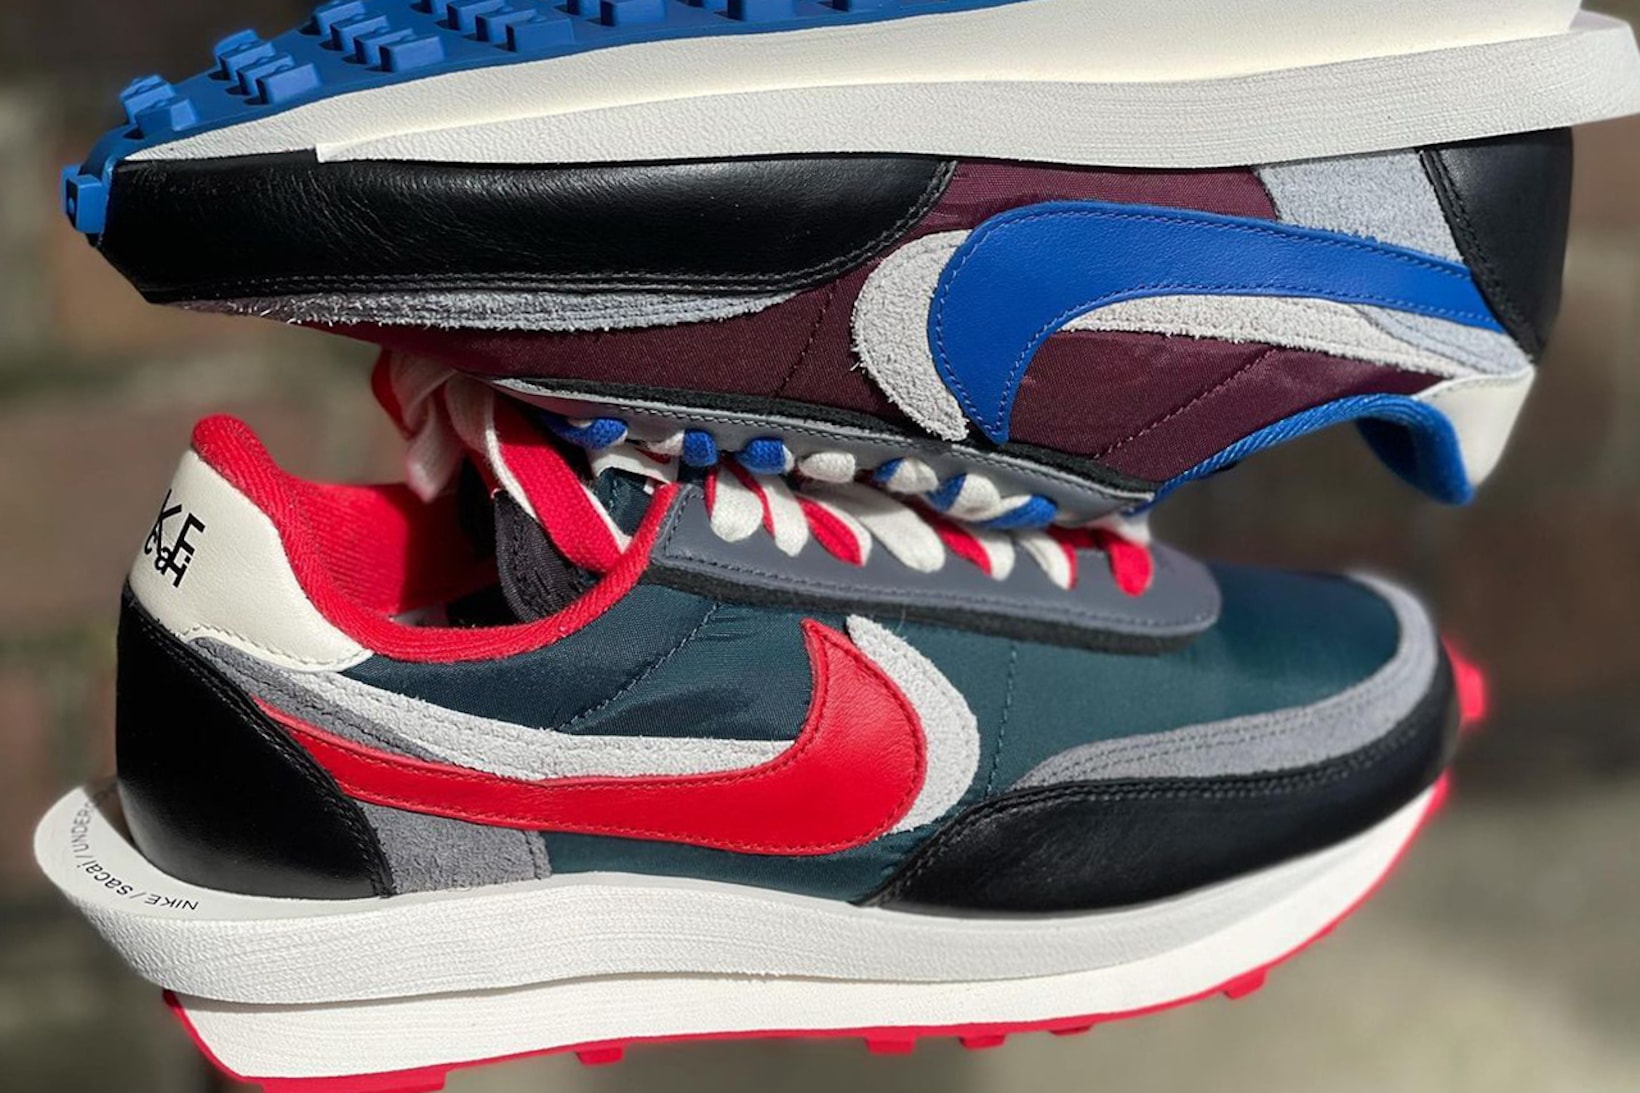 sacai UNDERCOVER Nike LDWaffle Collaboration Sneakers Footwear Shoes Midnight Spruce Night Maroon Blue Red White Black